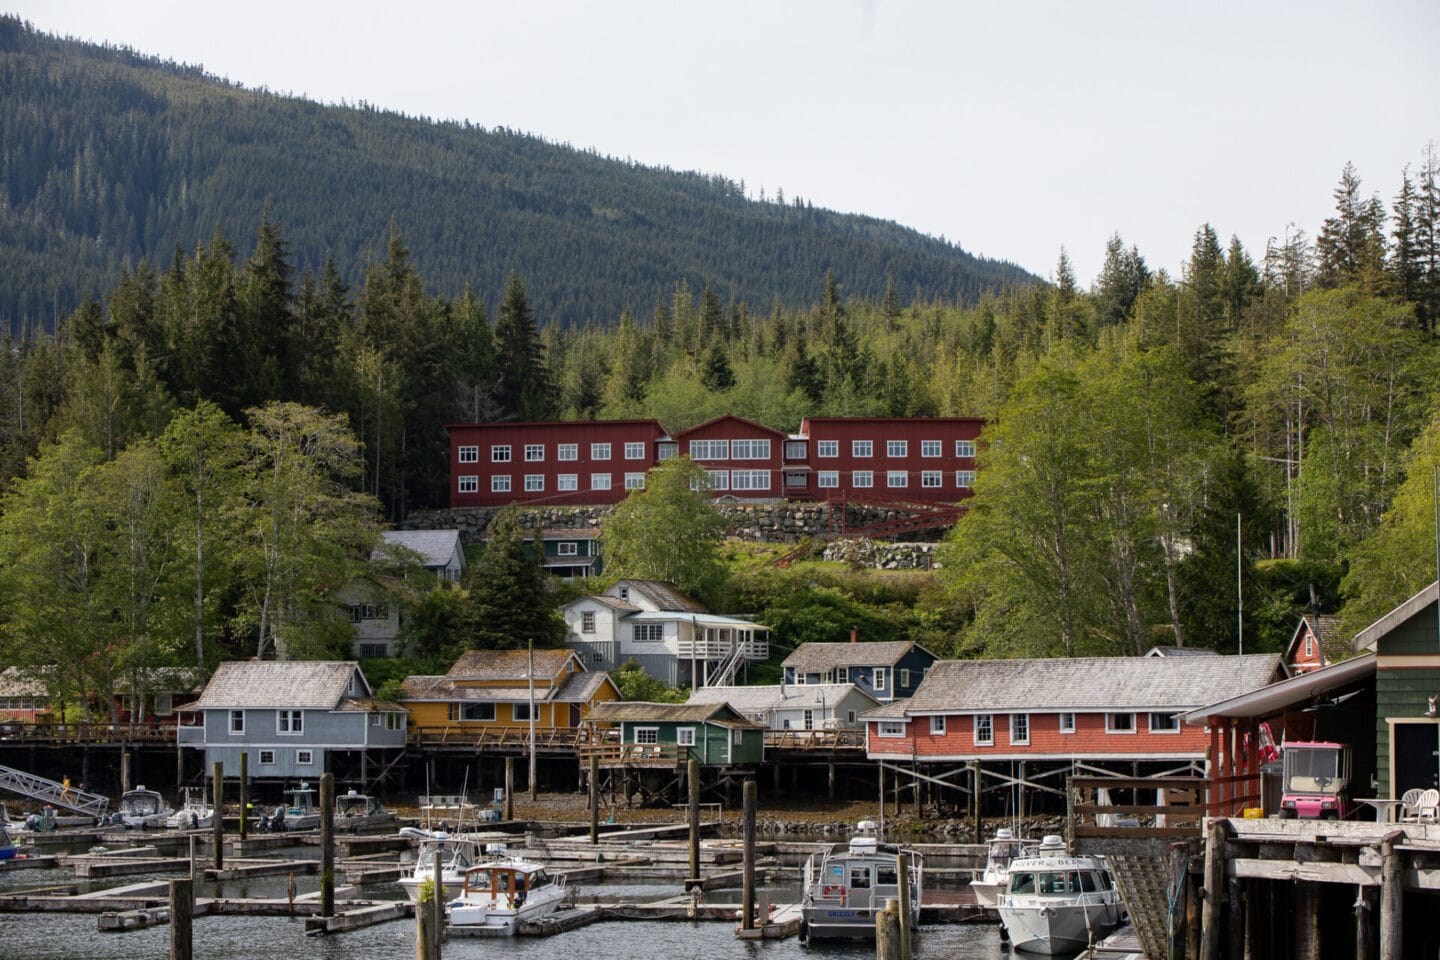 Where to stay in Telegraph Cove